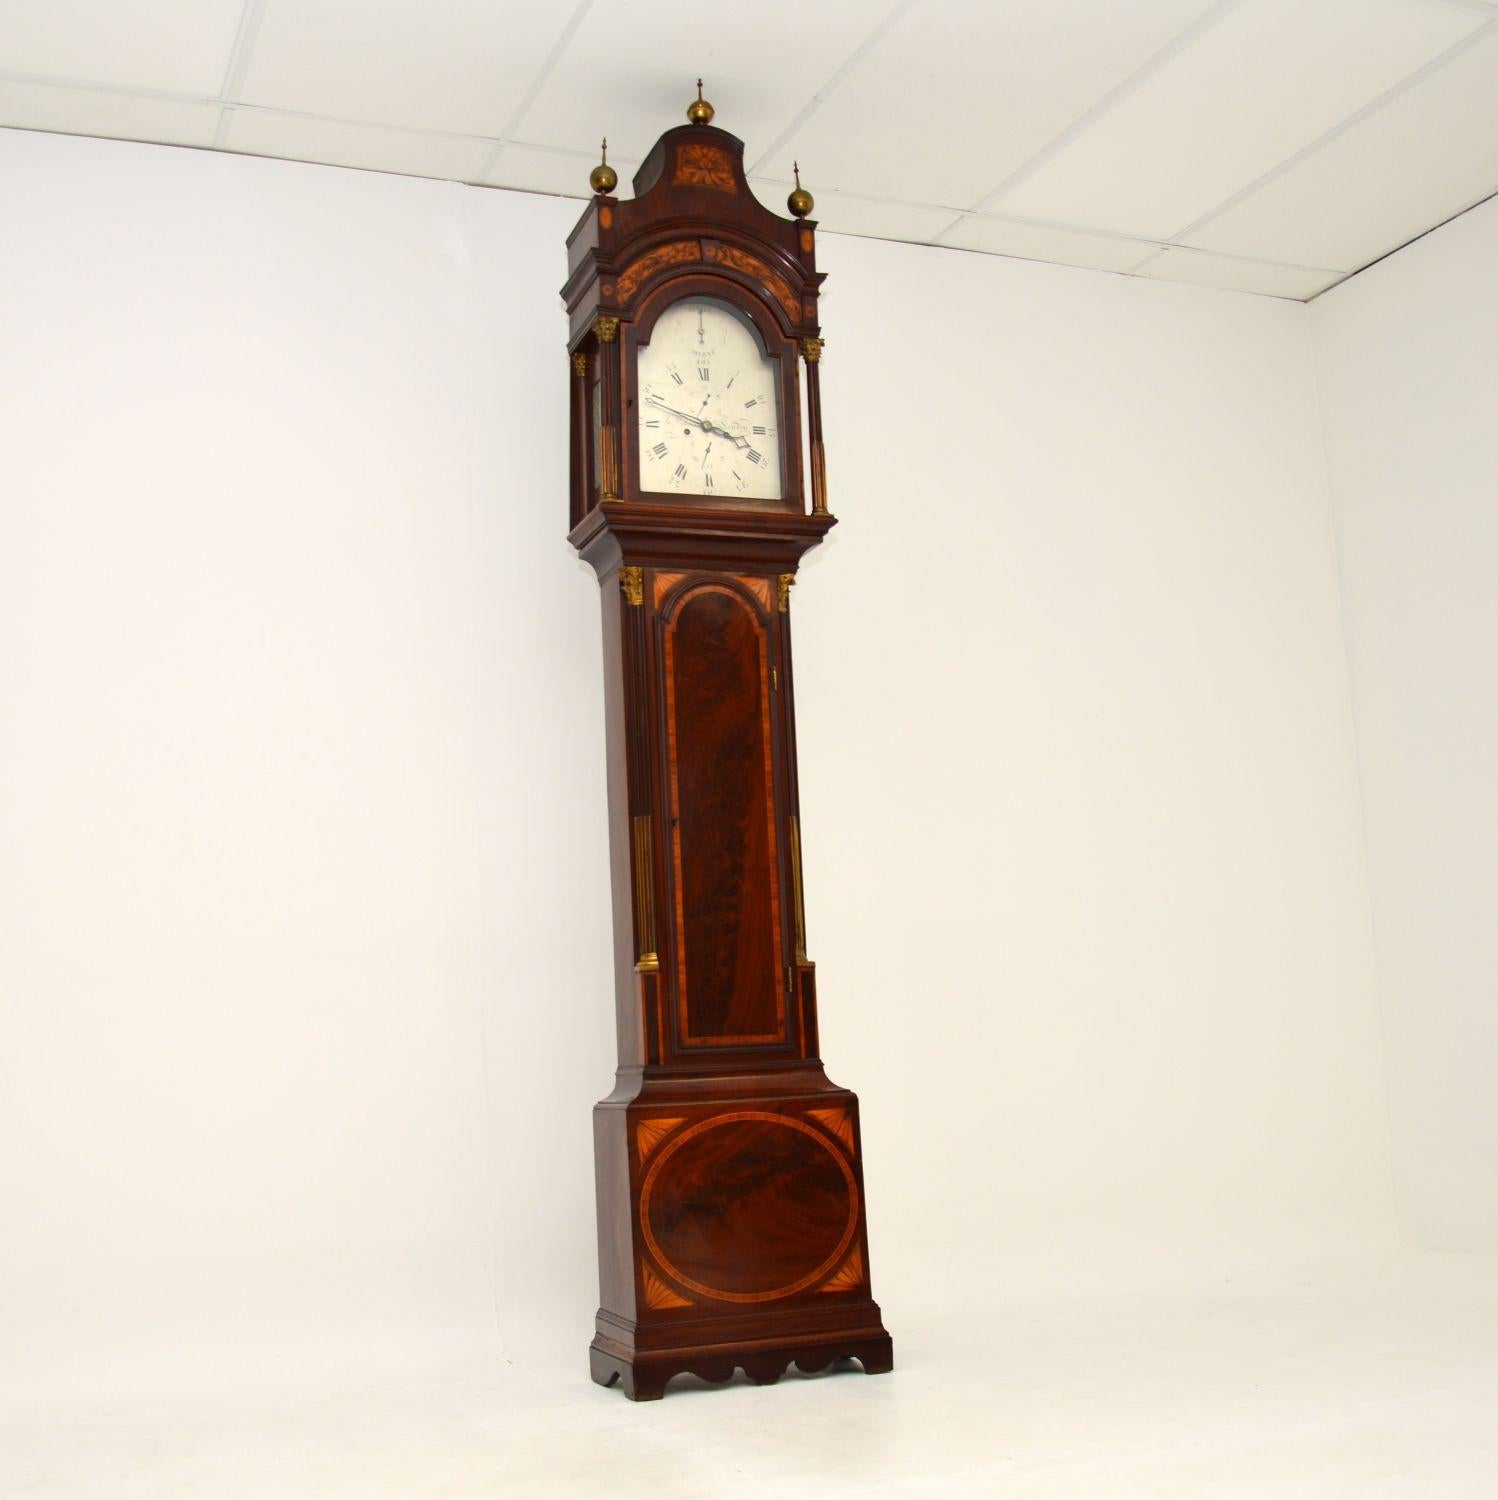 An excellent and very rare antique Georgian long case grandfather clock, beautifully made from inlaid wood. This case was made by the well known clock case maker Richard Reeves in England, it can be dated from 1800-1810. The original label can be